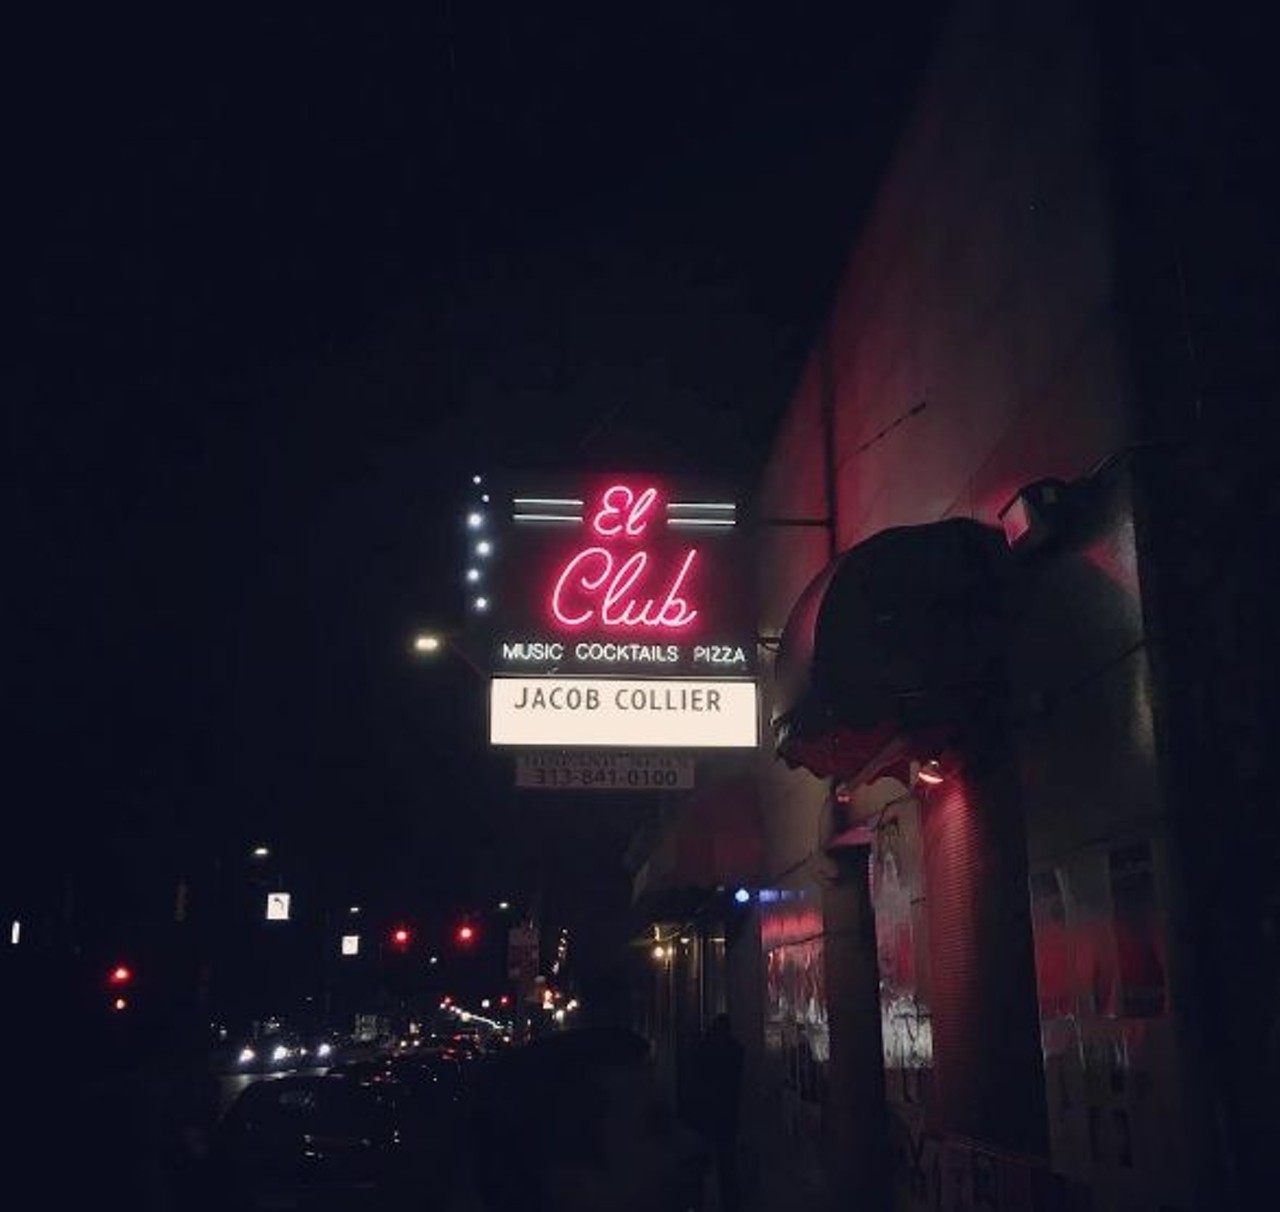 El Club
4114 Vernor Hwy
313-436-1793
While the actual size of El Club is pretty formidable, the actual space to sit down eat their delicious pizza is pretty limited. A bar and a few tables is all there is, but the back patio is another great spot to unwind, too. 
Photo via @elclubdetroit